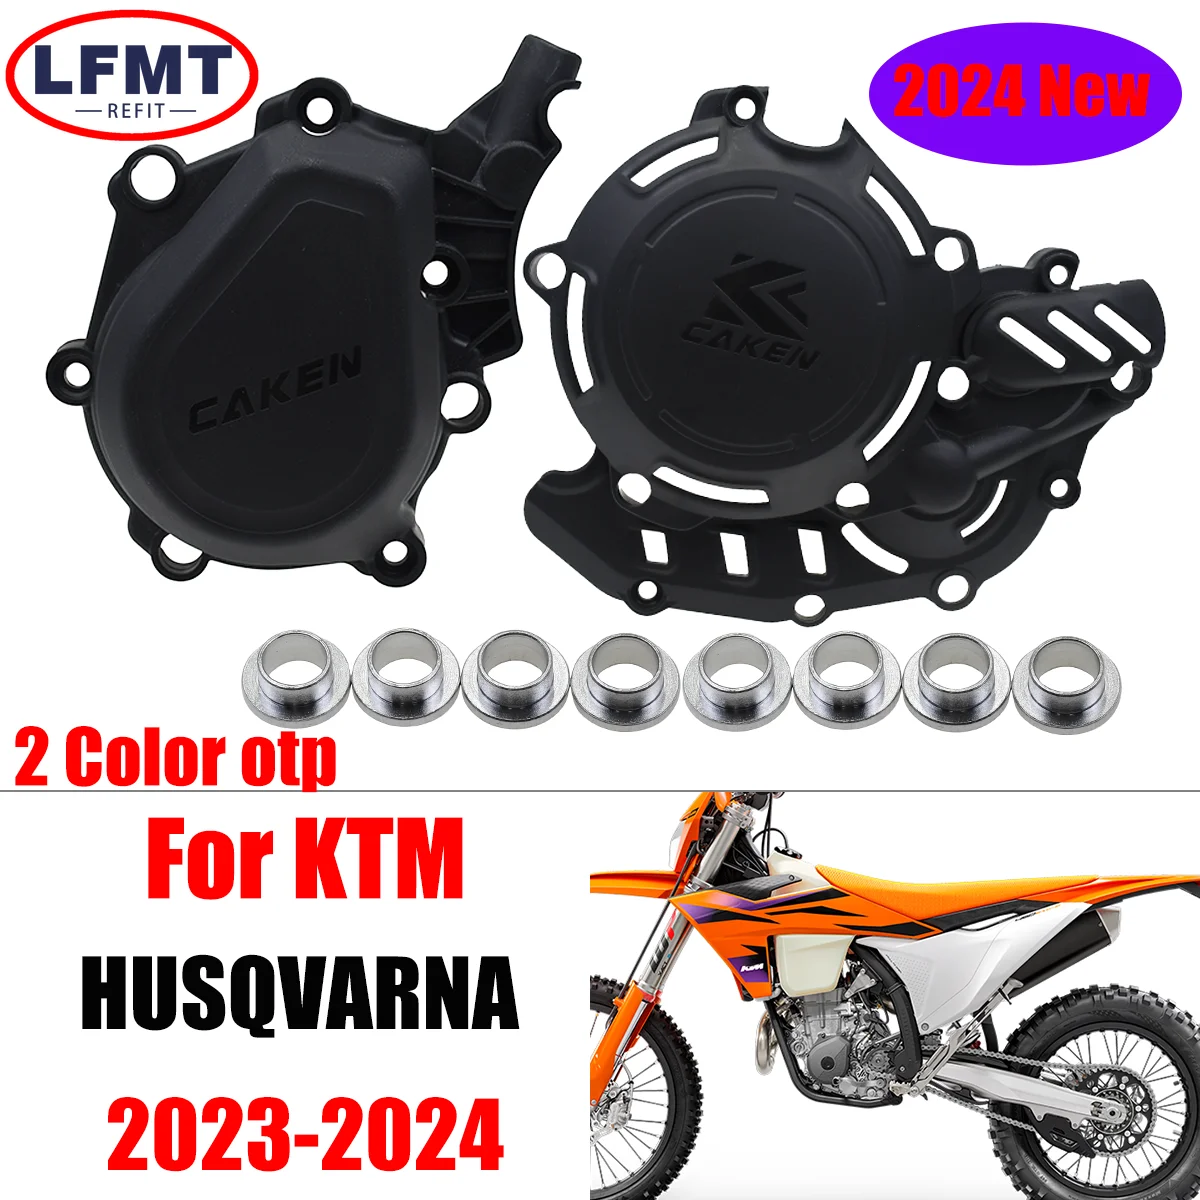 

2024 NEW Motorcycle Engine Ignition Clutch Cover Protector Guard For KTM XWF XCFW XCF SXF WXCF 450 500 For HUSQVARNA GASGAS 2023